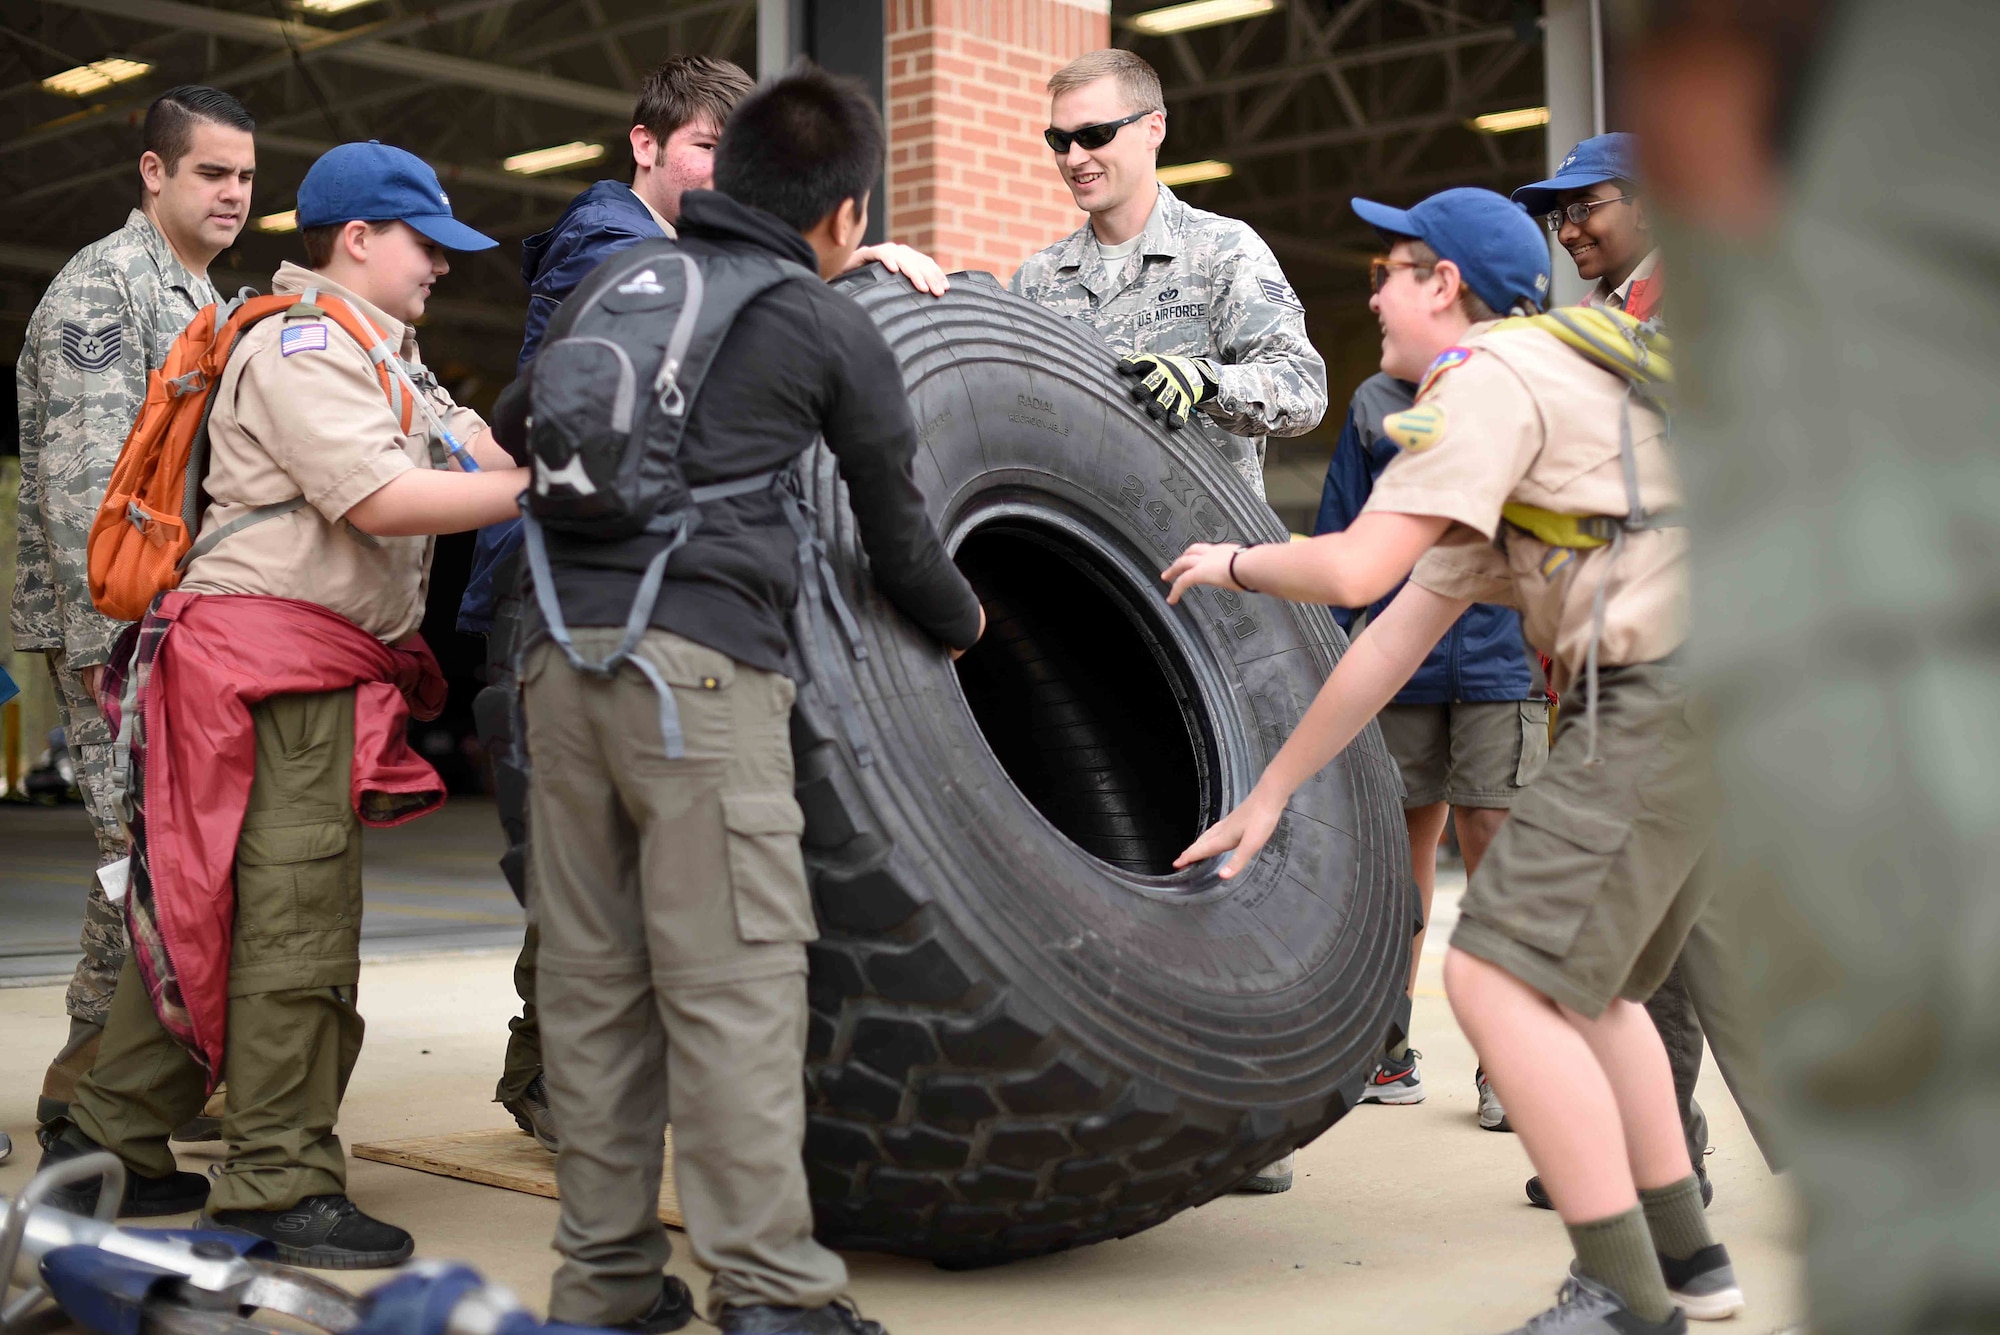 Scouts, Boy Scouts of America members try to push a tire with 14th Civil Engineer Squadron firefighters March 30, 2019, on Columbus Air Force Base, Mississippi. There were many hands-on activities to teach scouts of all ages what different careers in the Air Force do. (U.S. Air Force photo by Airman 1st Class Keith Holcomb)